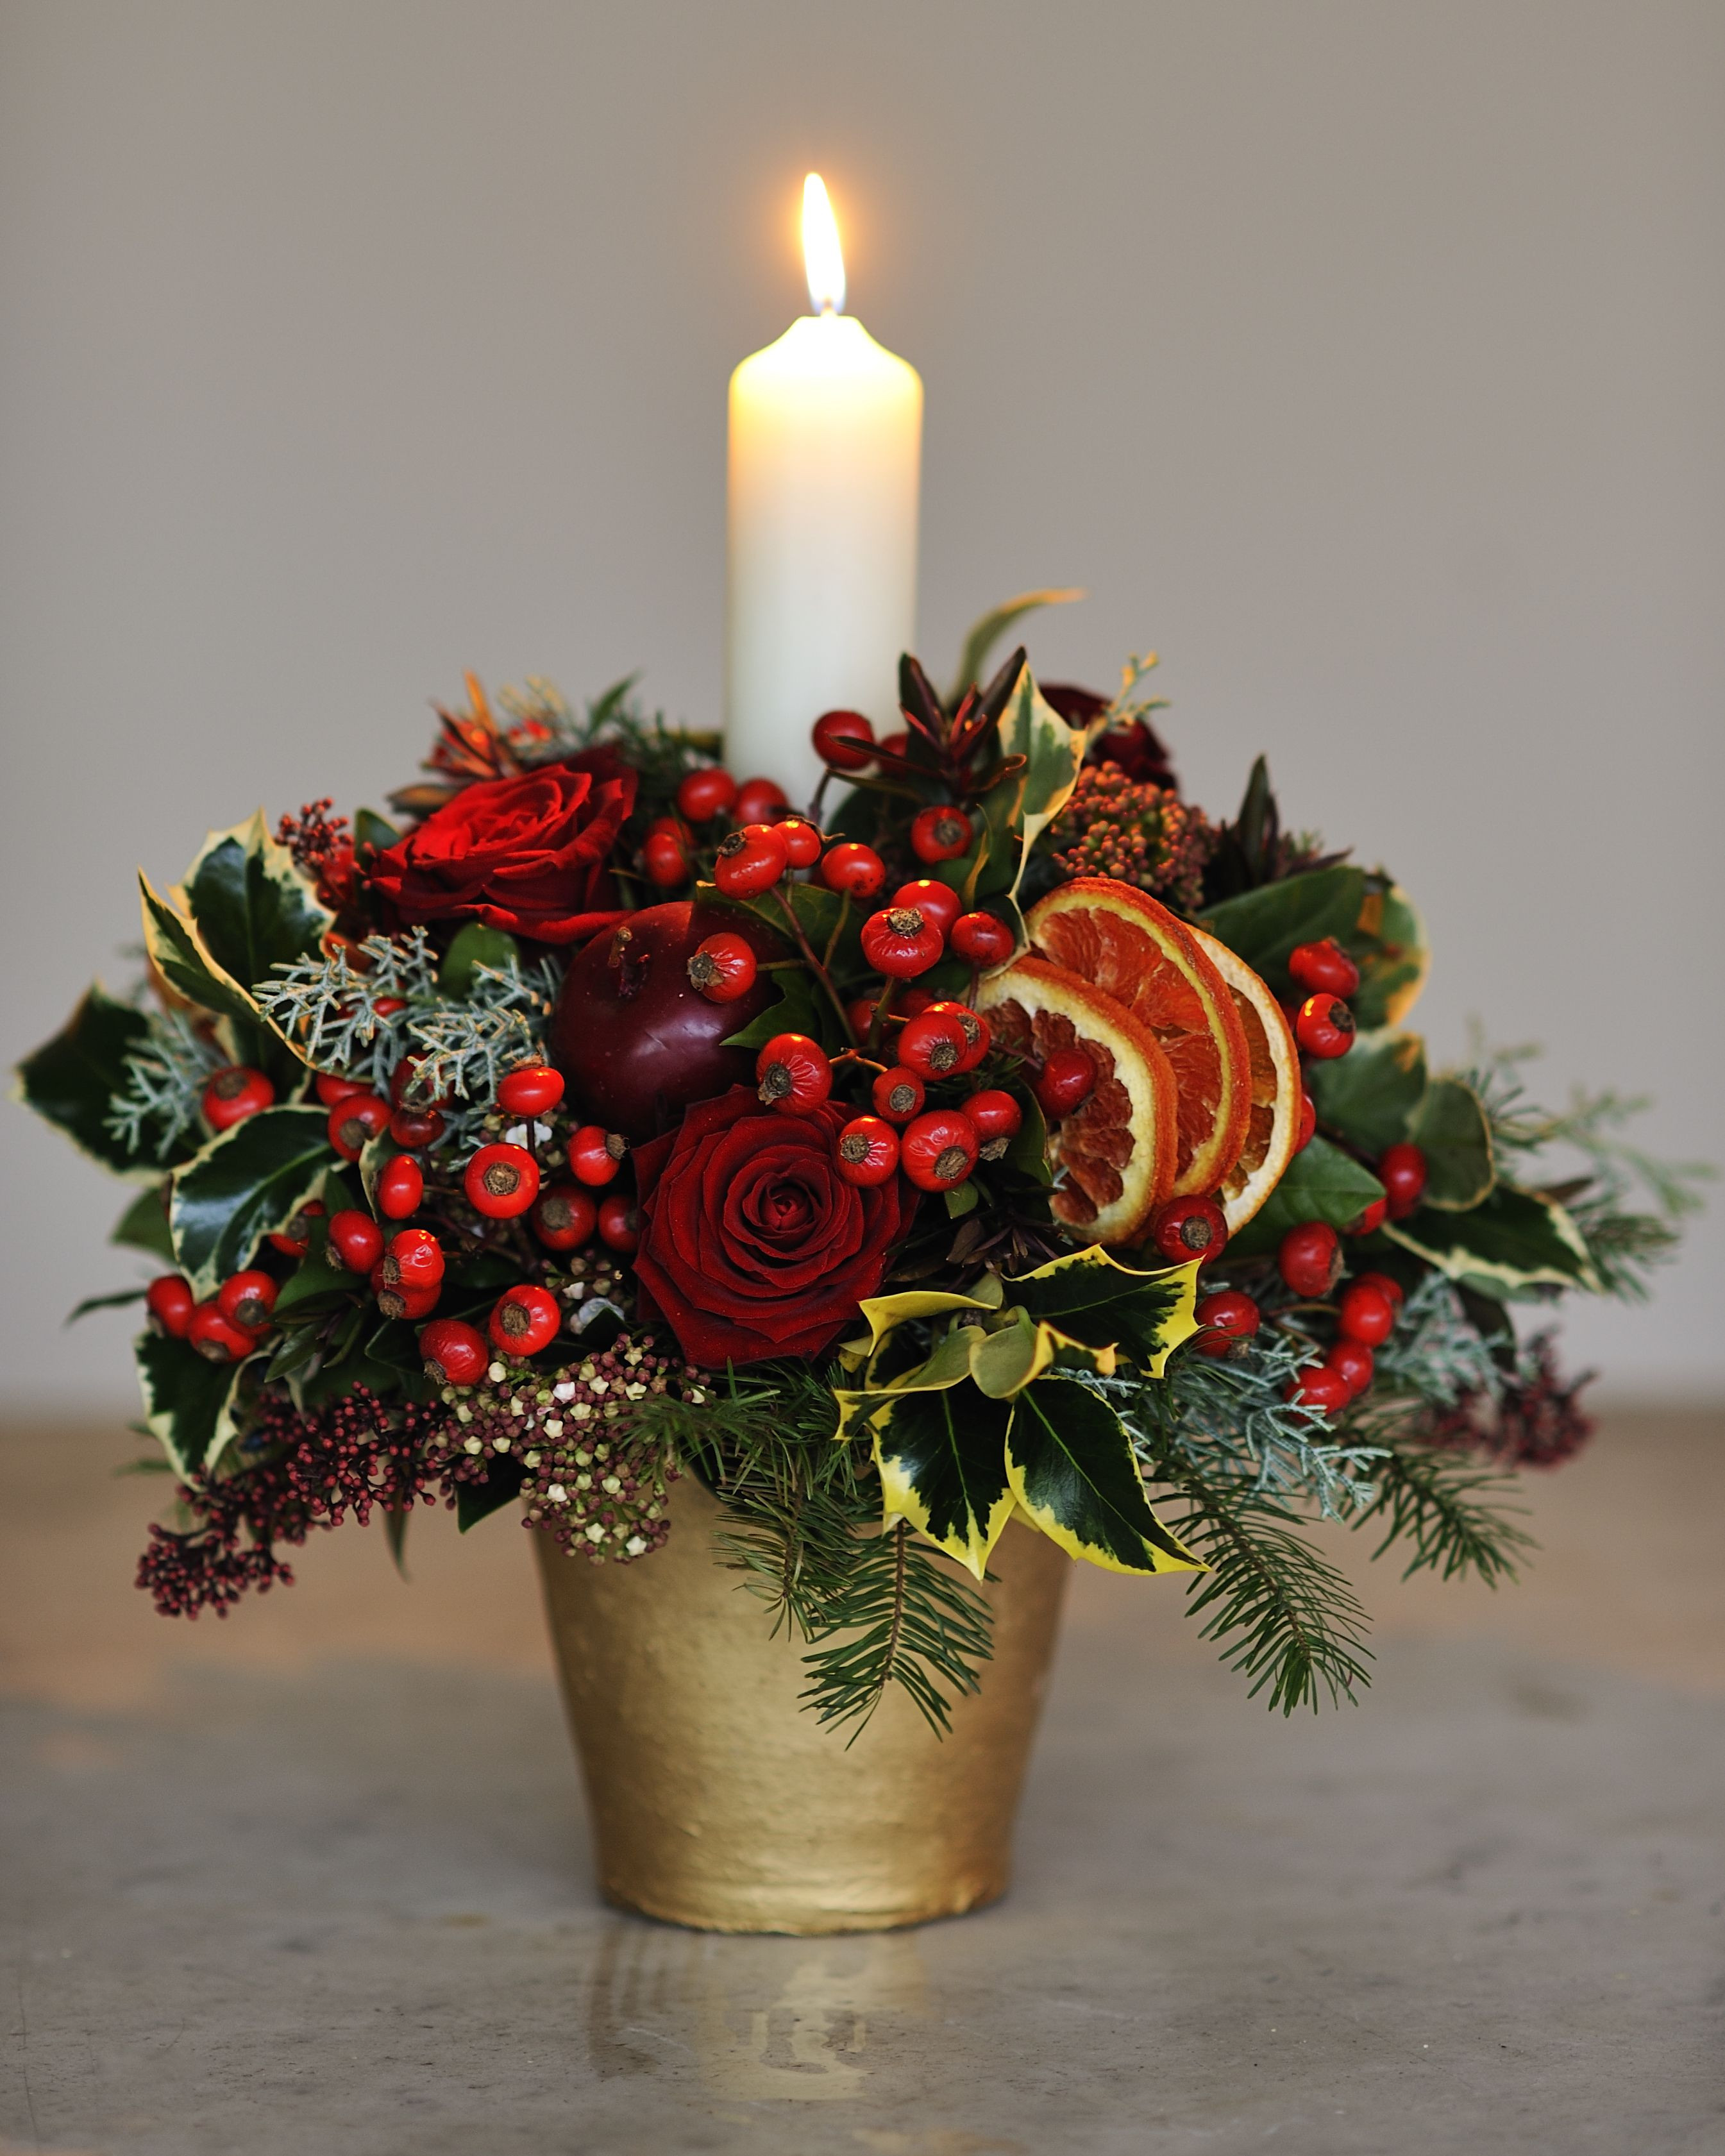 Christmas Table Flower Arrangements
 CLASSY CHRISTMAS CENTREPIECE WITH FLOWERS AND BERRIES